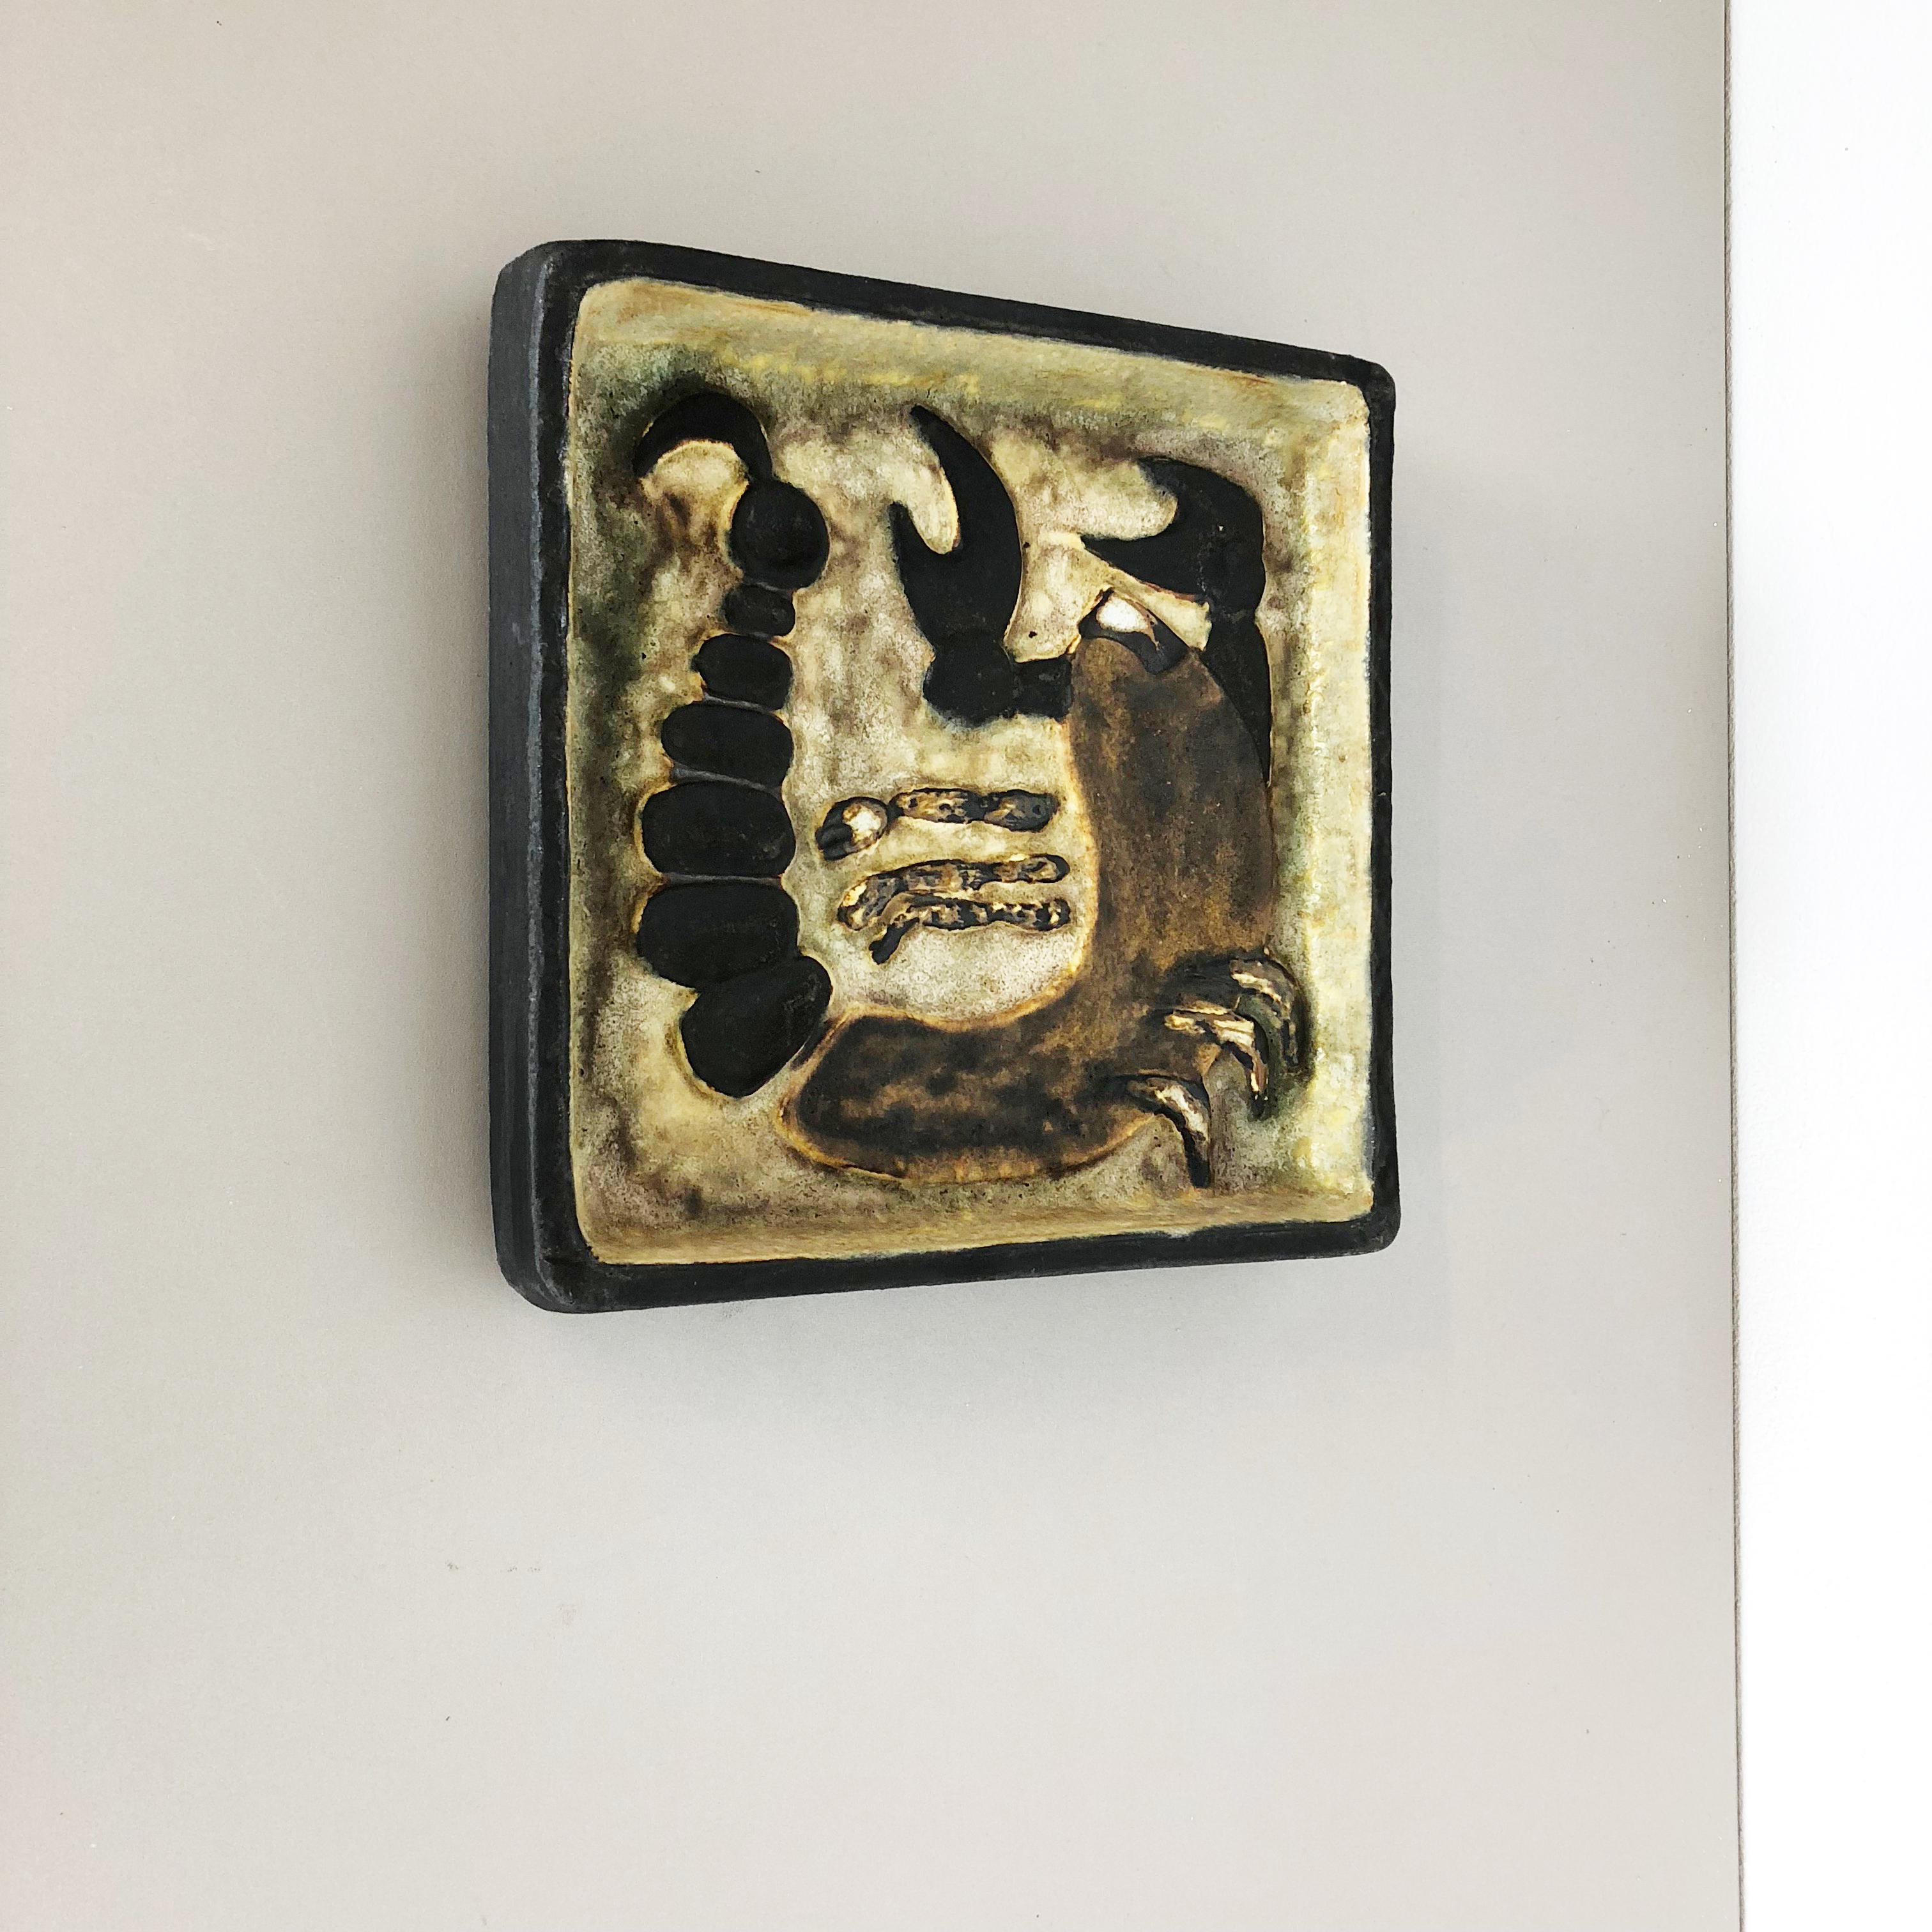 Article:

Ceramic wall plate


Decade:

1960s


Producer:

Atelier Schäffenacker, Ulm Germany


Design: 

Helmut Schäffenacker


This original vintage ceramic wall plate with abstract hand-painted and colorful illustrations of a